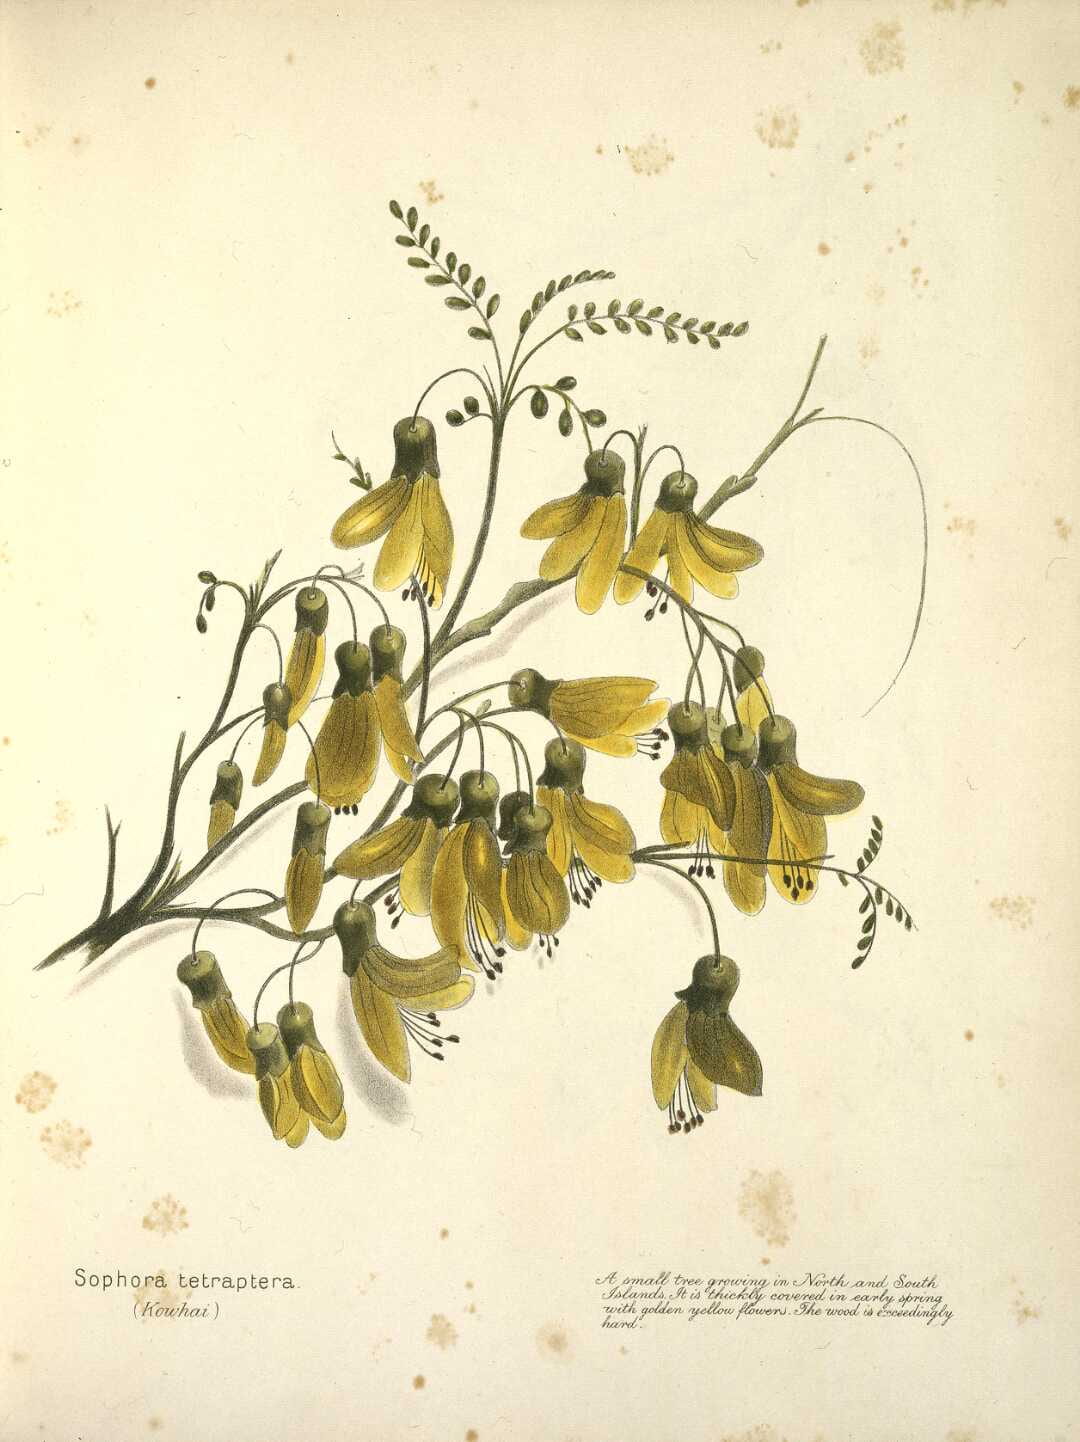 A branch showing leaves and flowers of kowhai